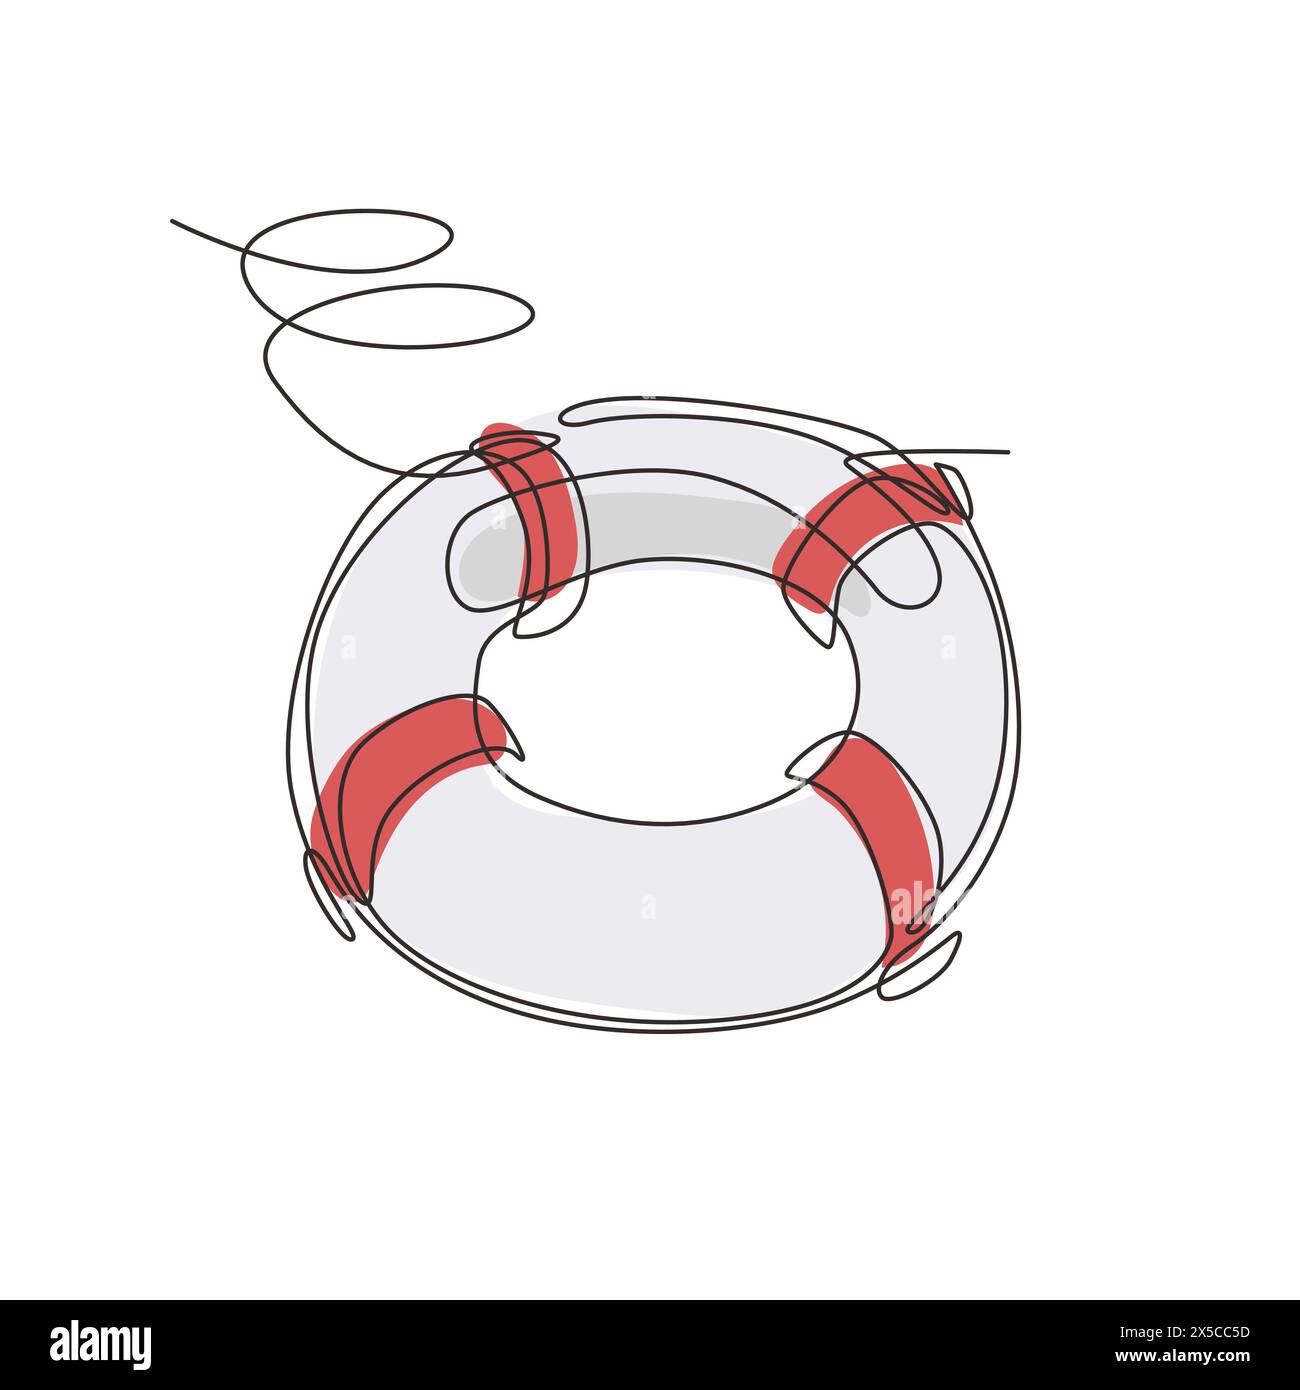 Single continuous line drawing lifebuoys, rescue belts, inflatable rubber ring with rope for help and safety of life drowning. Rescue ring for quick h Stock Vector